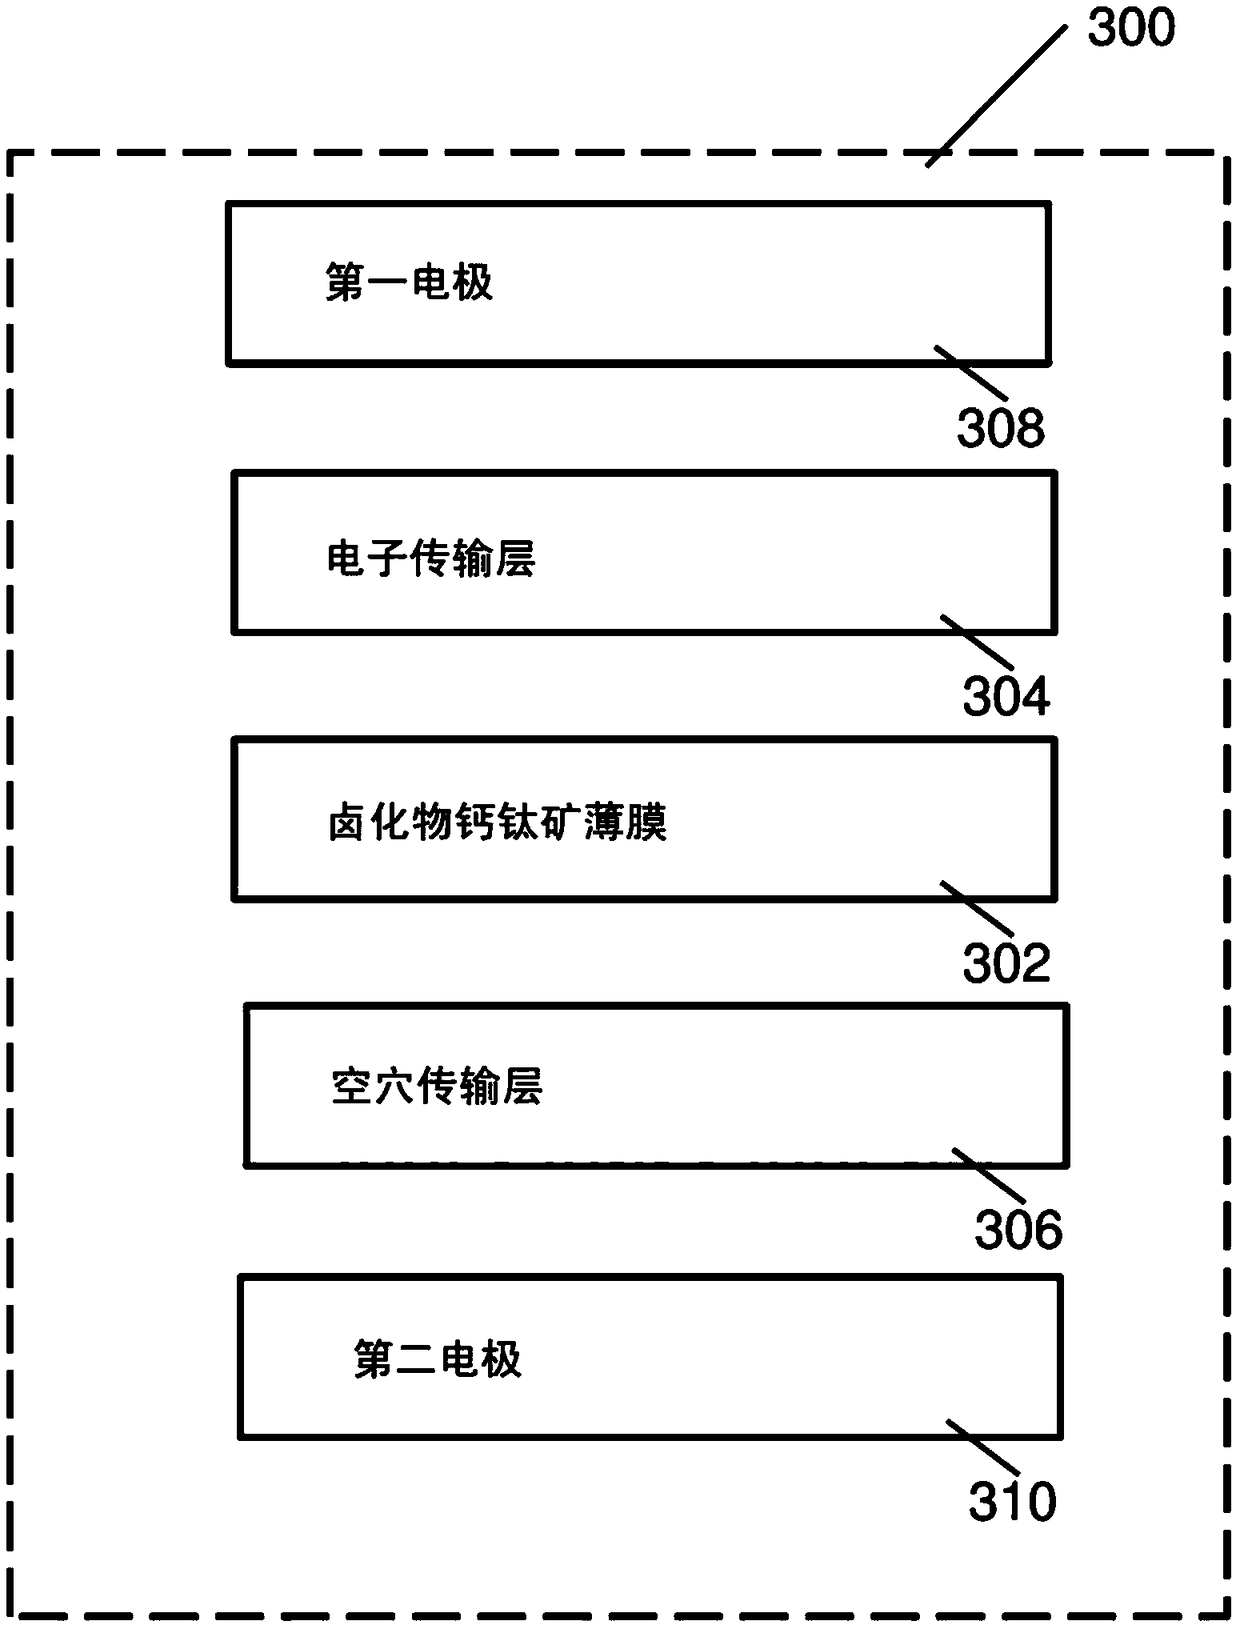 Halide perovskite film, solar cell including, and method of forming the same